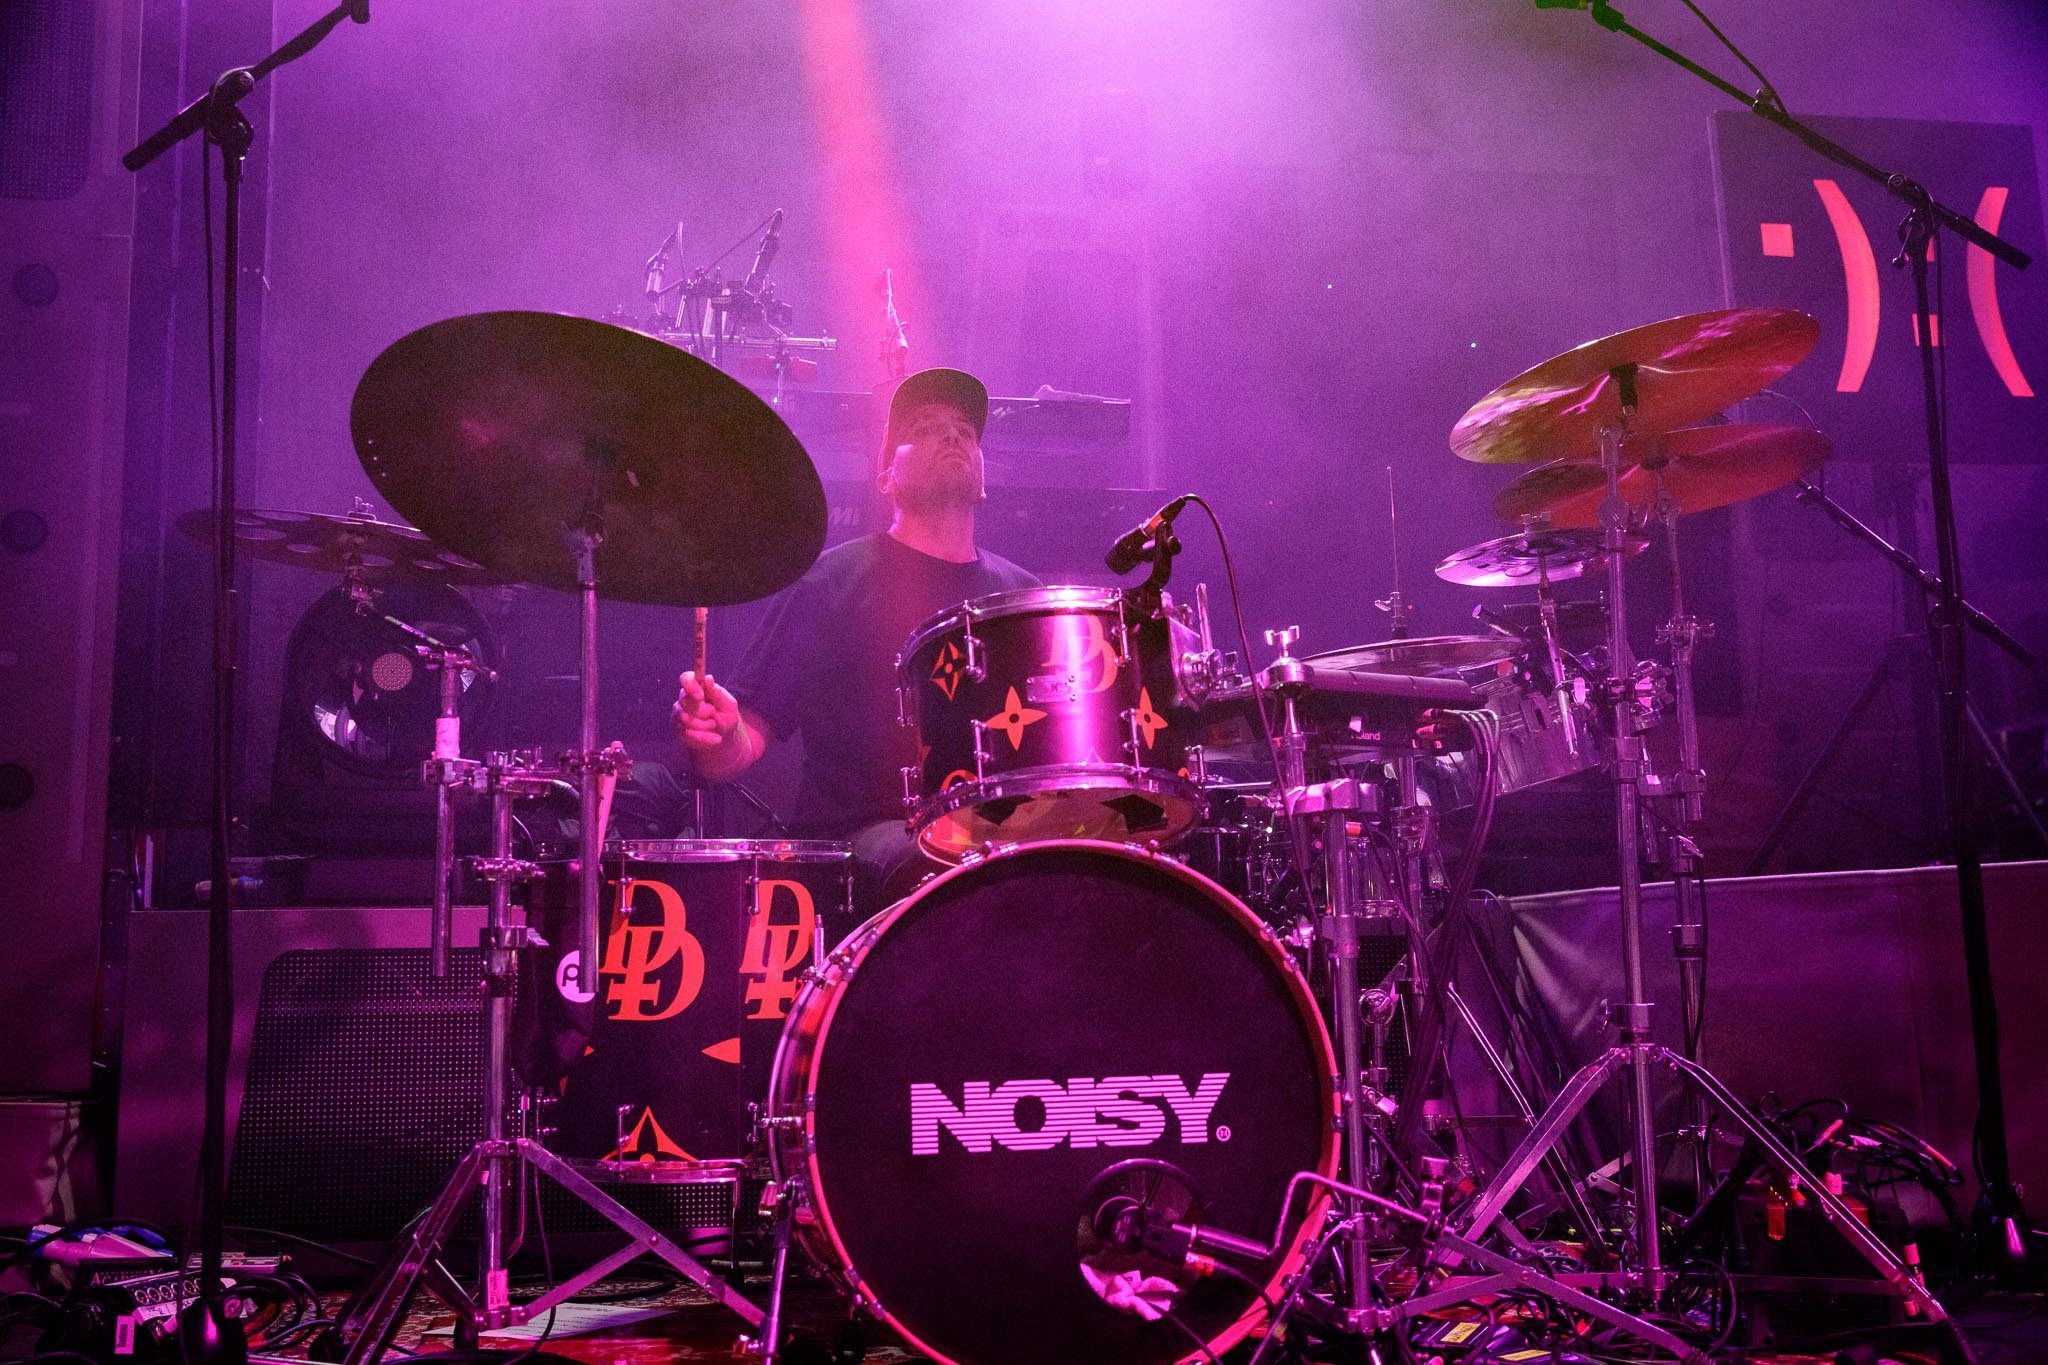 Noisy at the Manchester Academy on October 28th 2021 ©Johann Wi